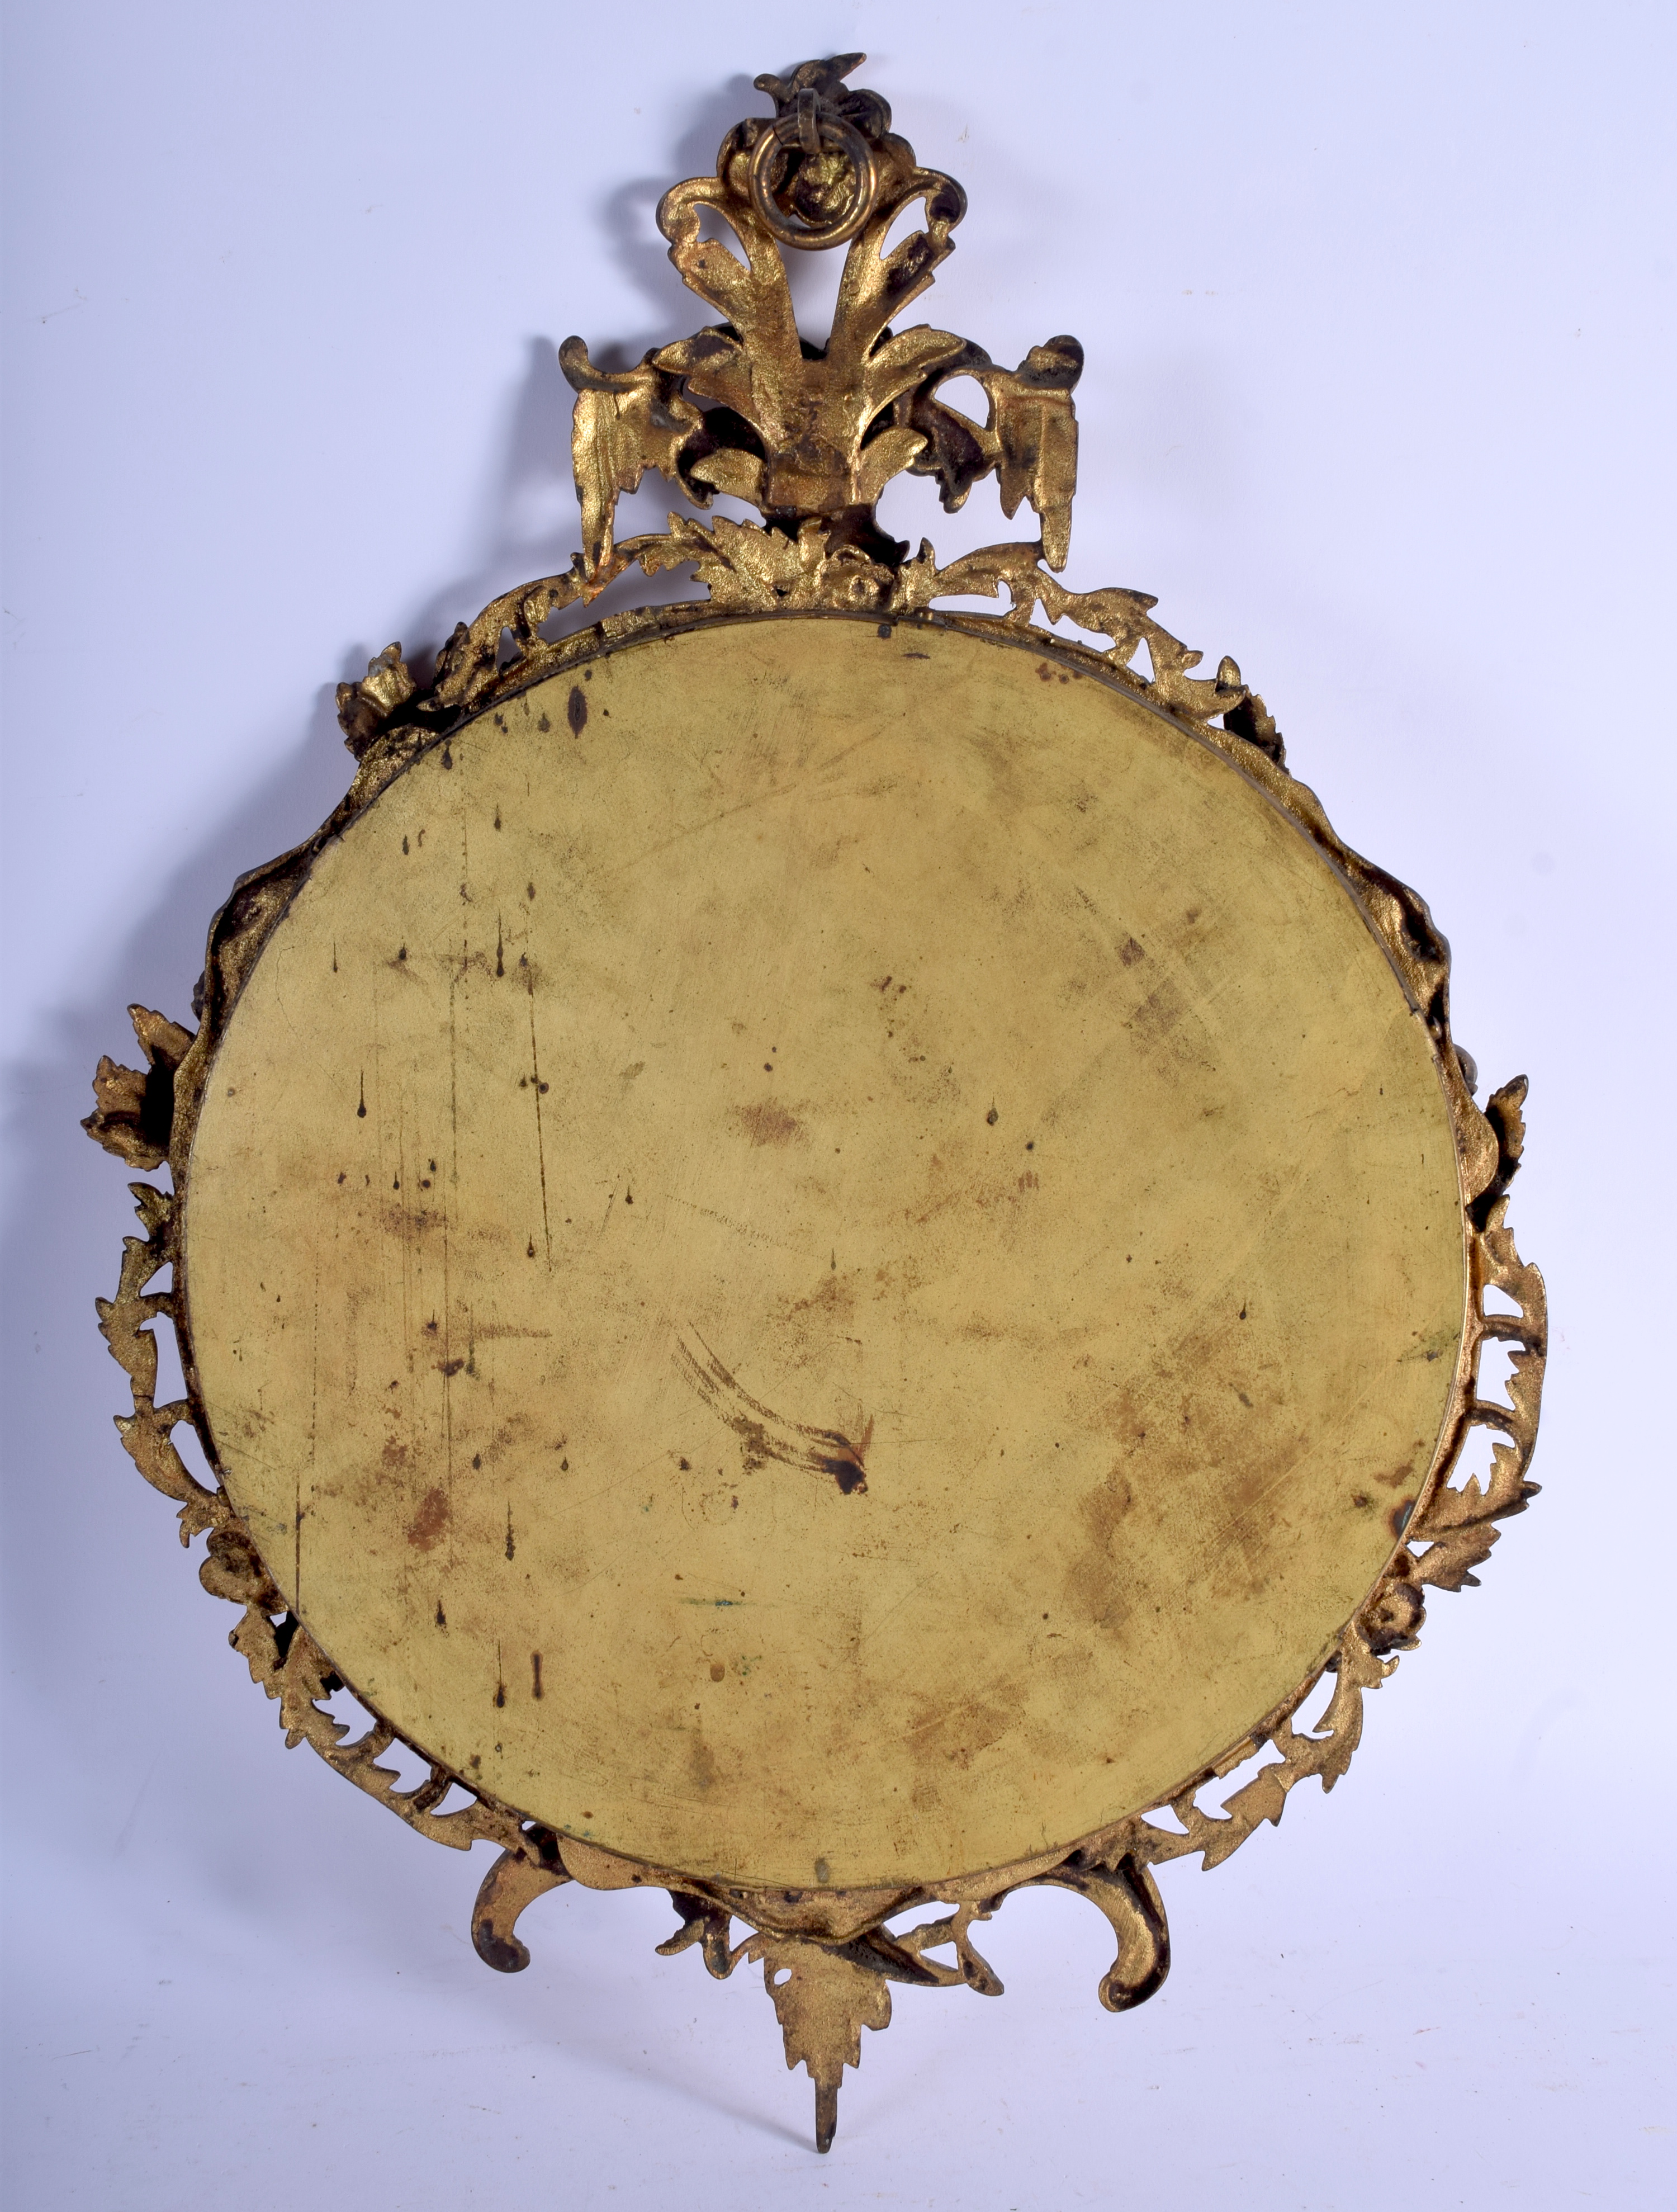 A 19TH CENTURY FRENCH GILT BRONZE MIRROR encased within foliage and a bird. 50 cm x 30 cm. - Image 4 of 4